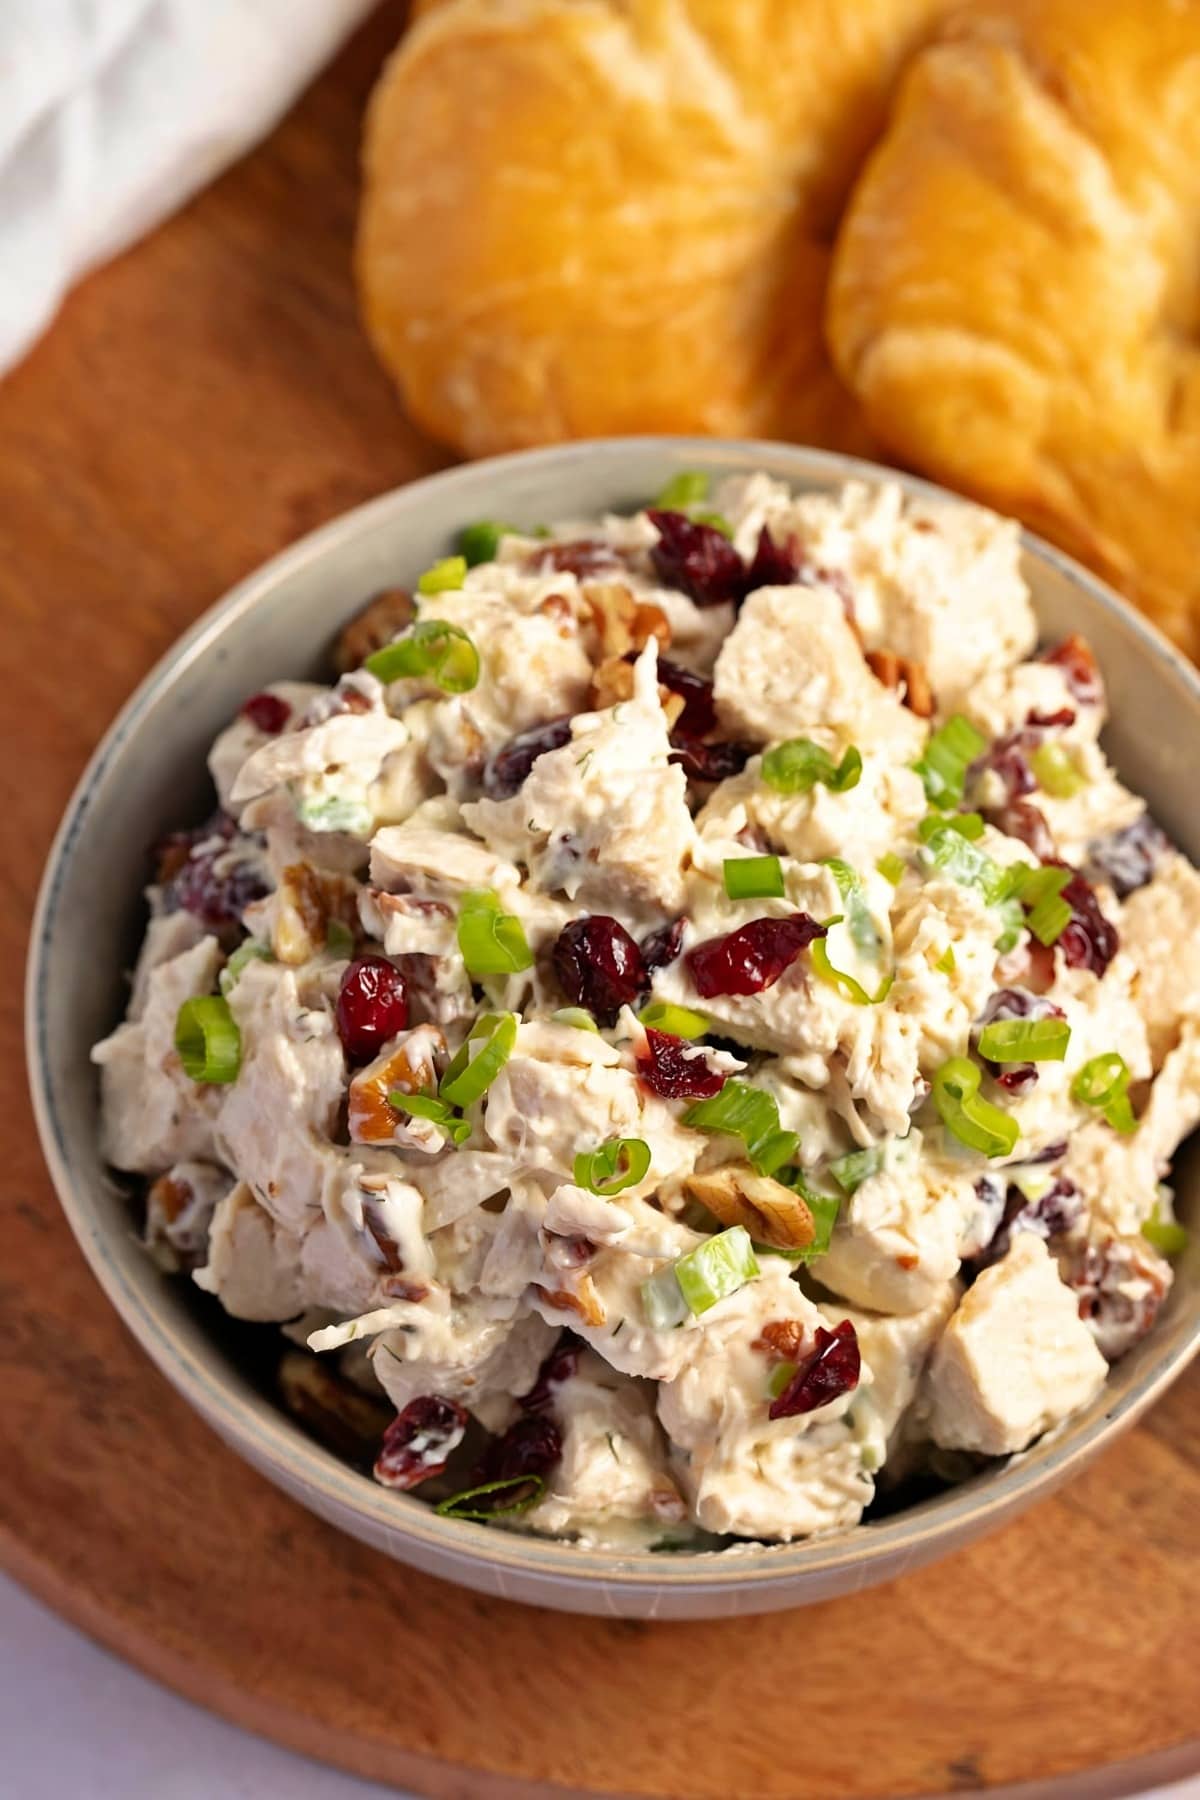 Bowl of salad with chicken, mayonnaise, green onions, dried cranberries, chopped pecans, lime juice, and dried dill weed.